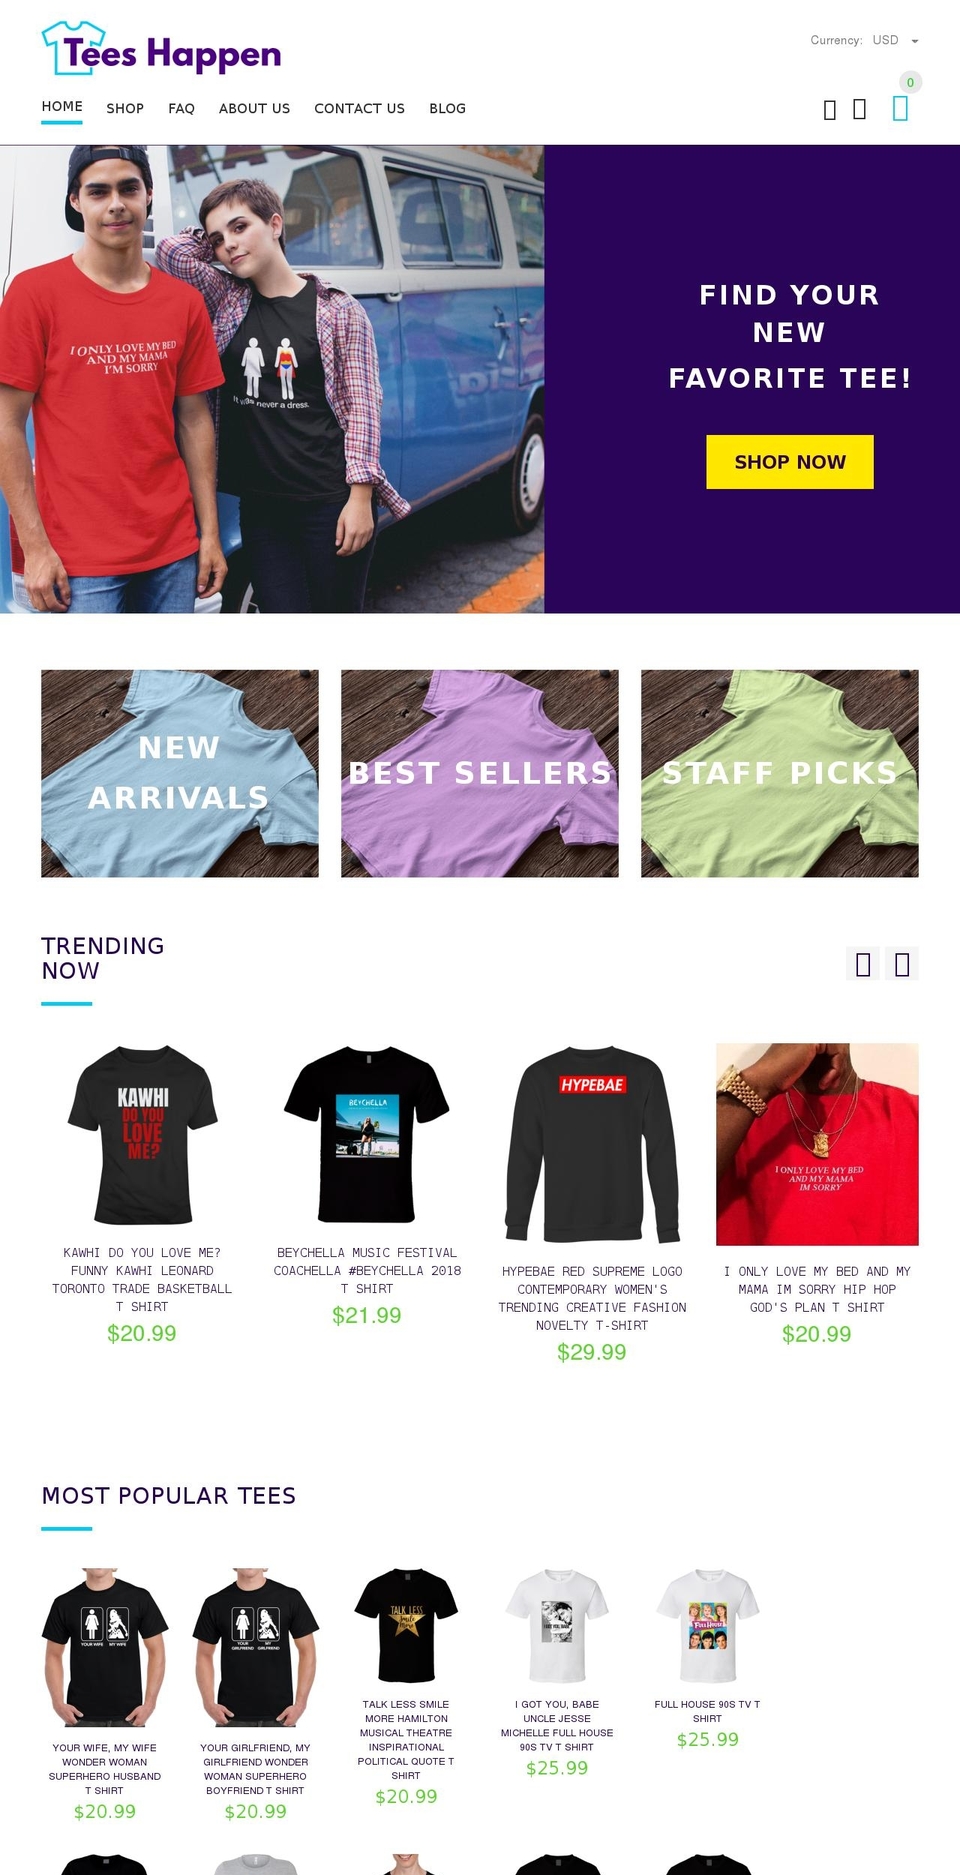 yourstore-v2-1-3 Shopify theme site example teeshappen.com